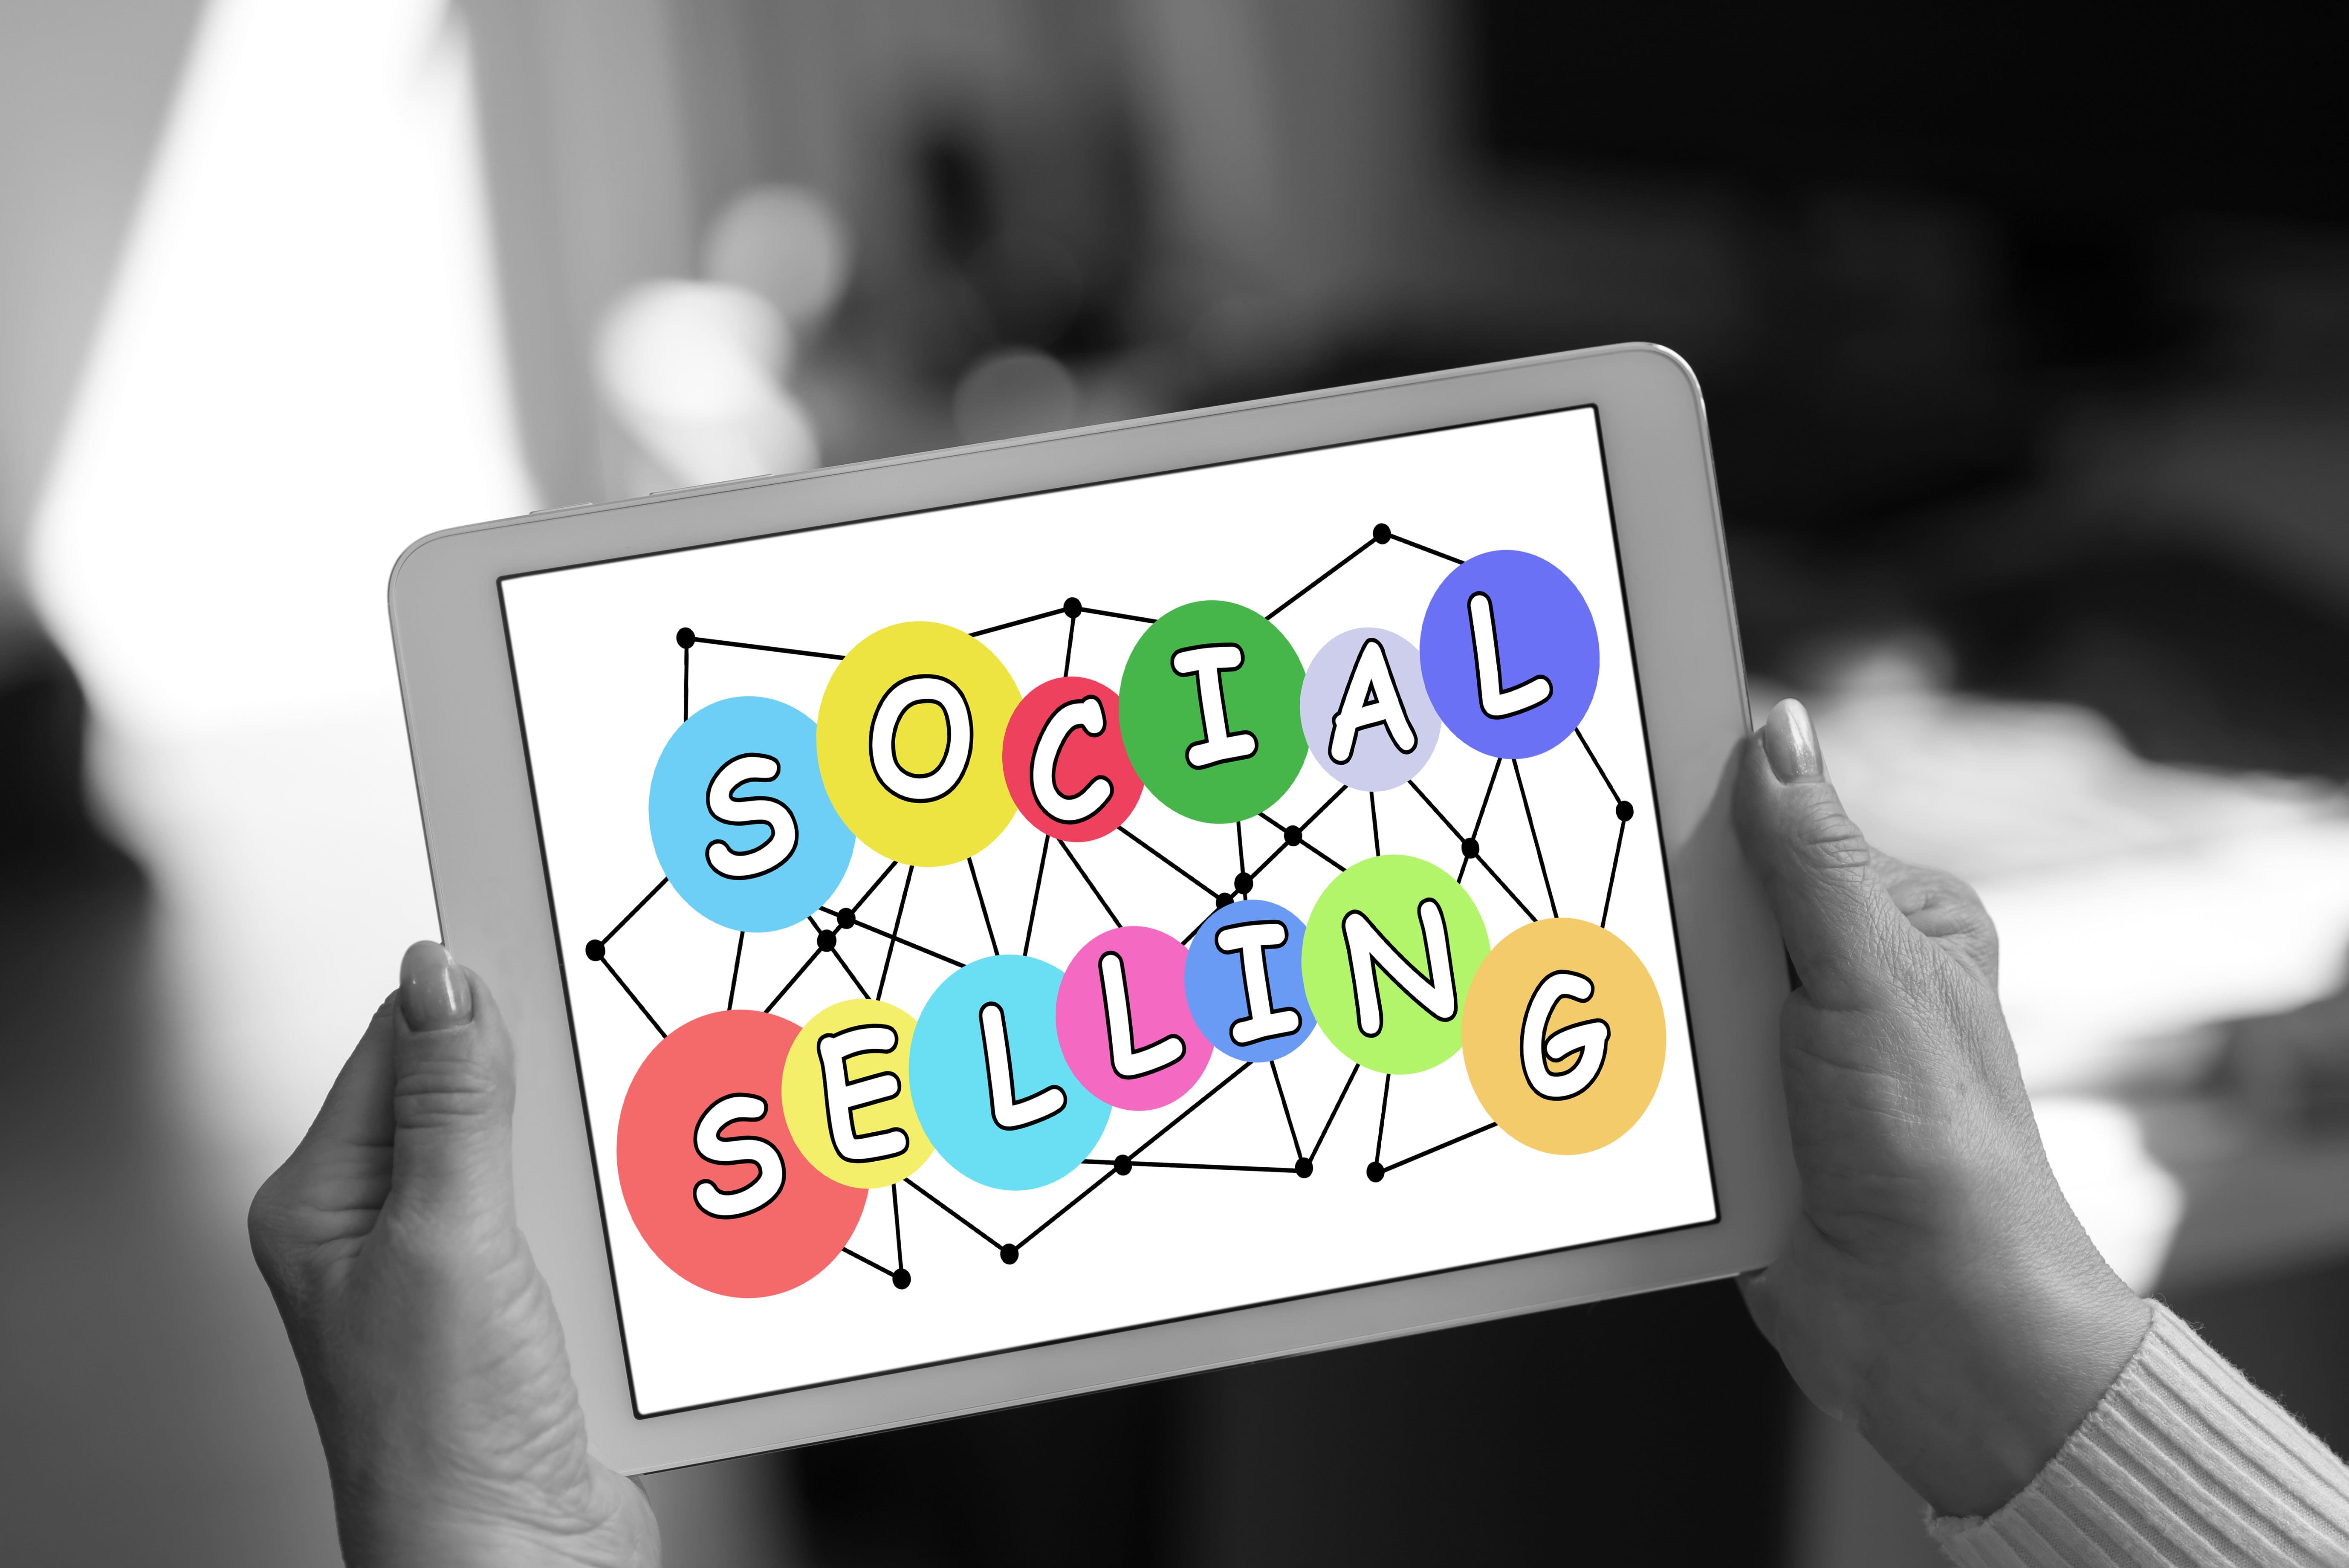 Social Media Selling Tips: There is More to Social Selling Than Selling